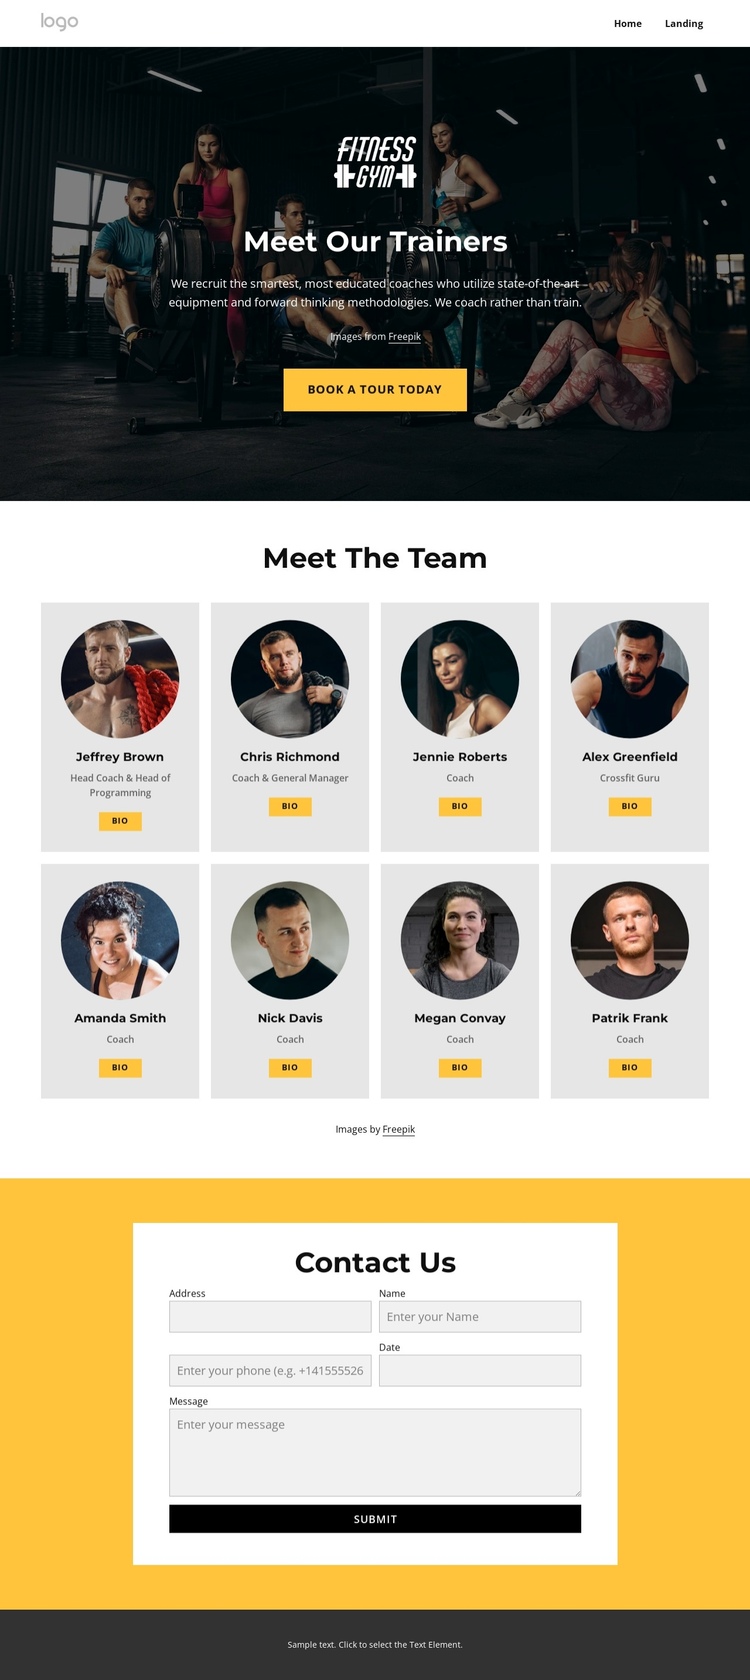 Meet our trainers One Page Template